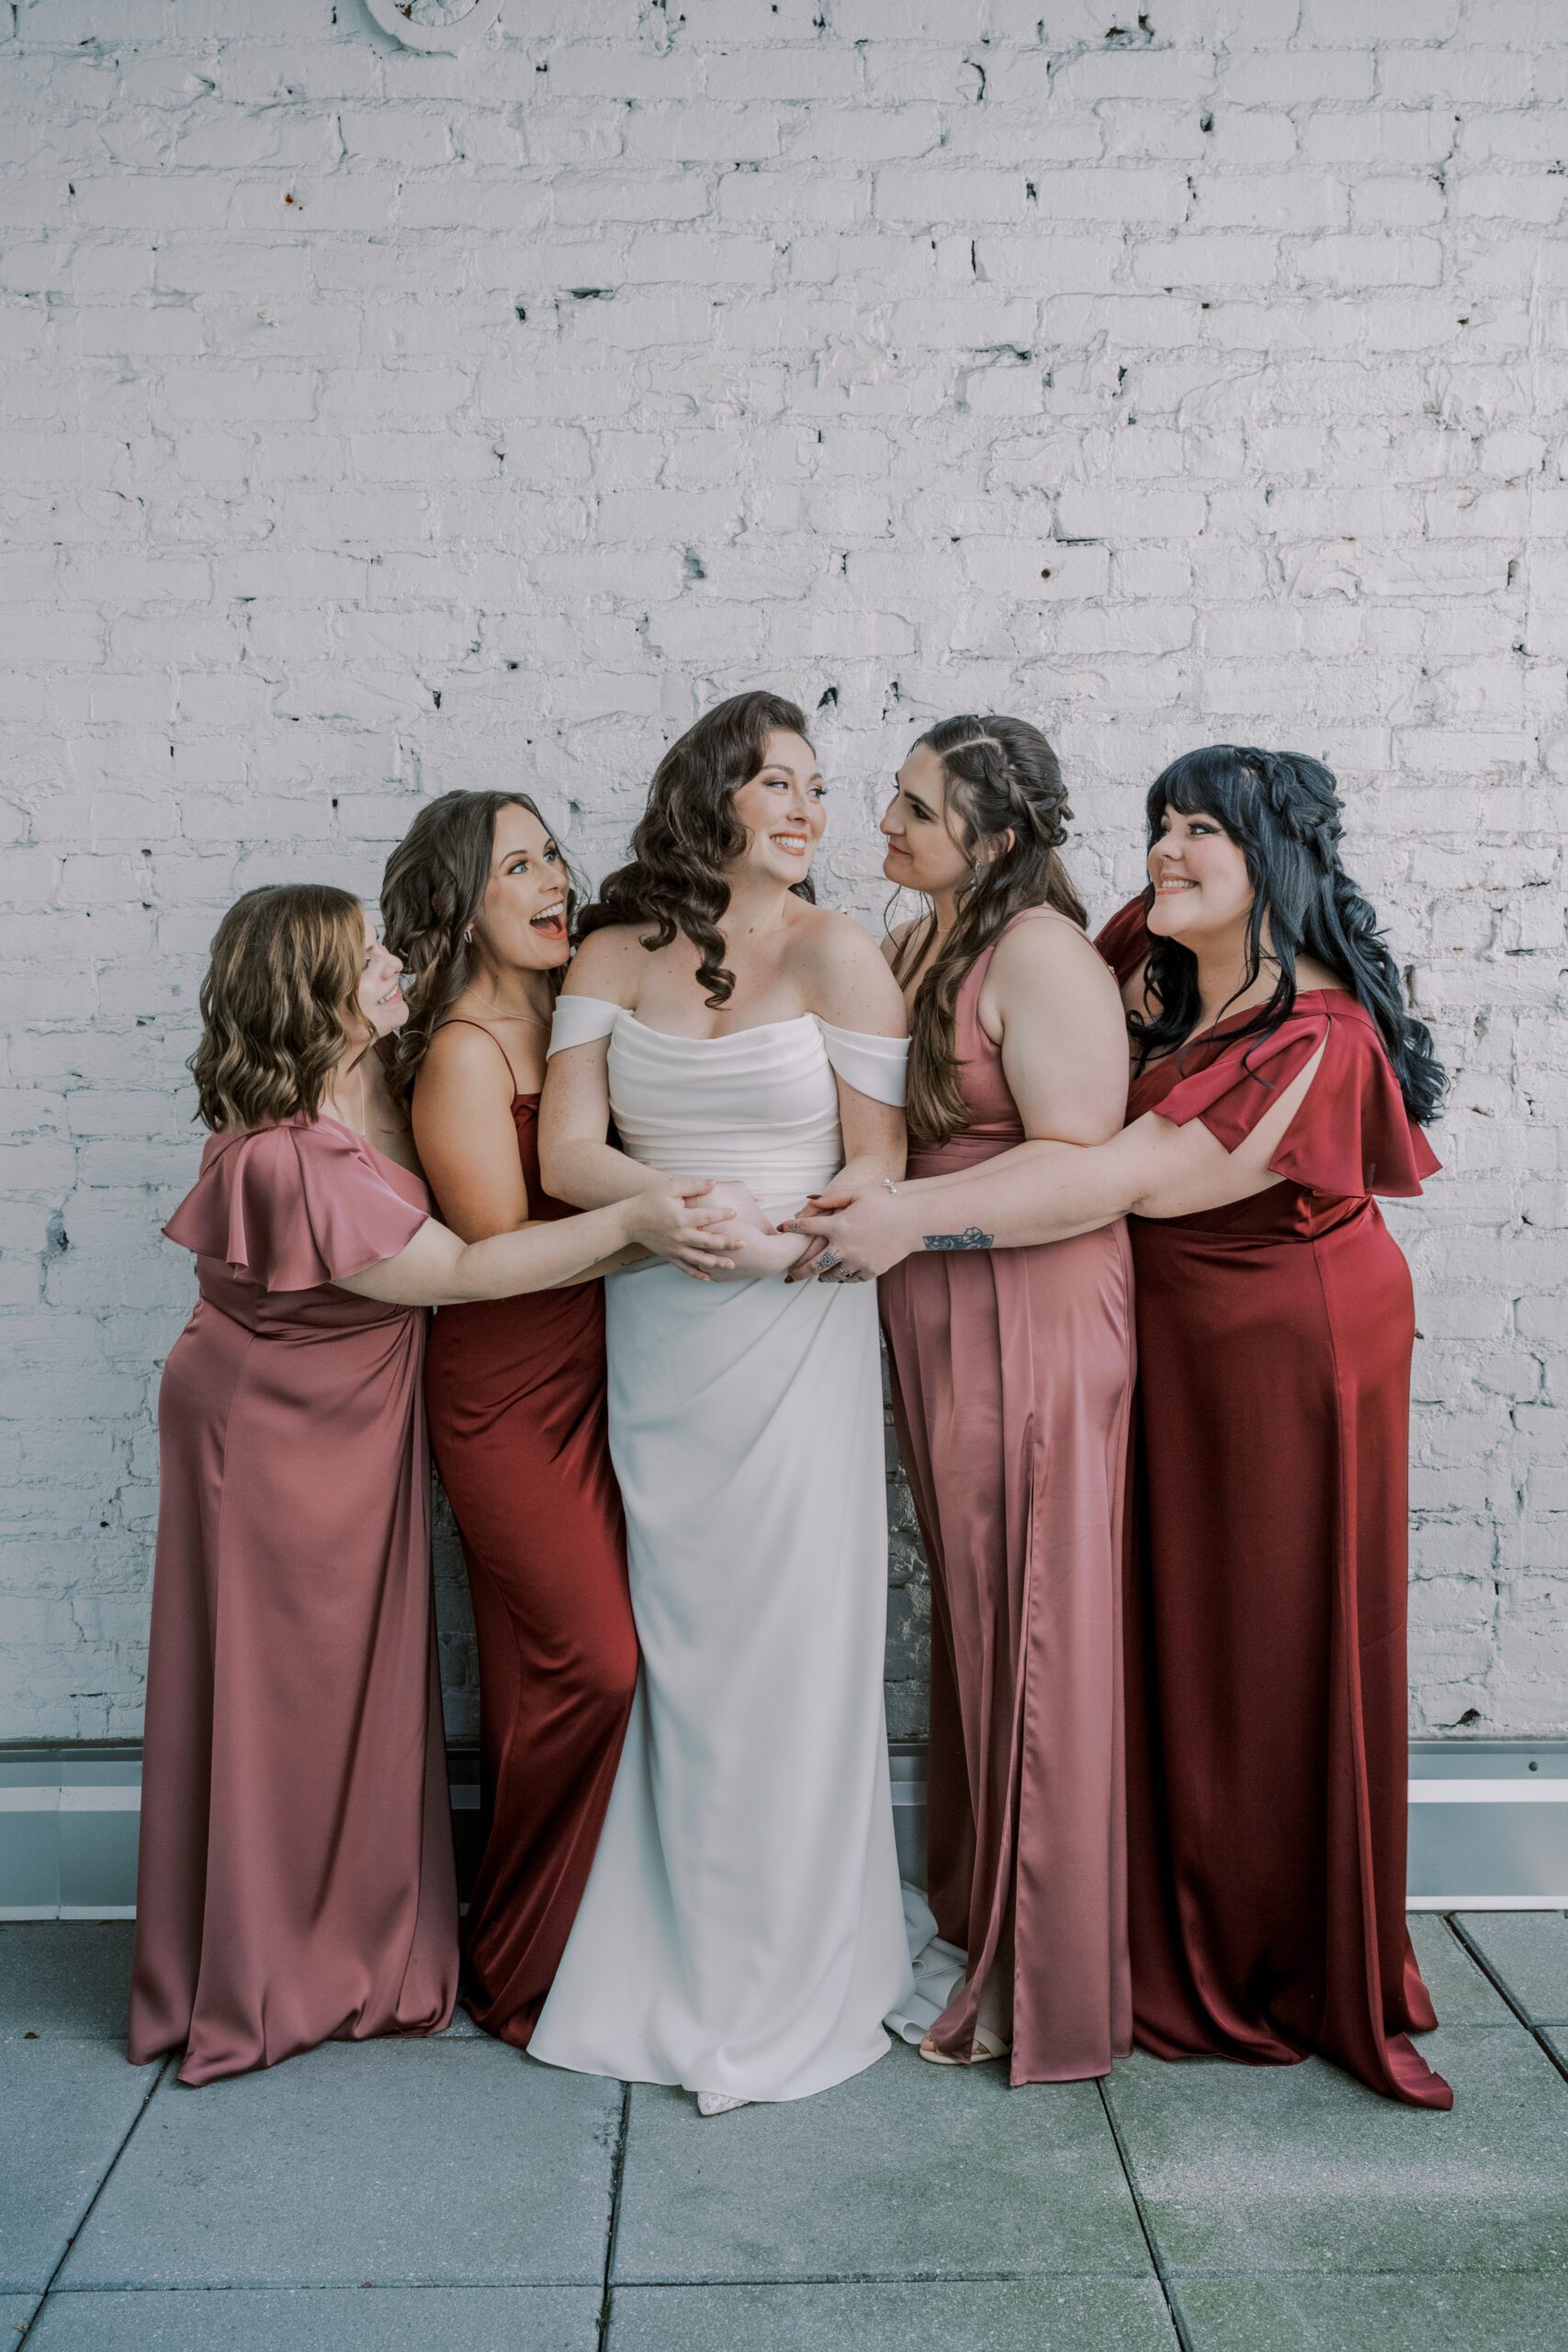 Full length photo of bride in her white wedding dress with 2 bridesmaids on each side of her alternating red and rose colored dresses, all smiling at one another